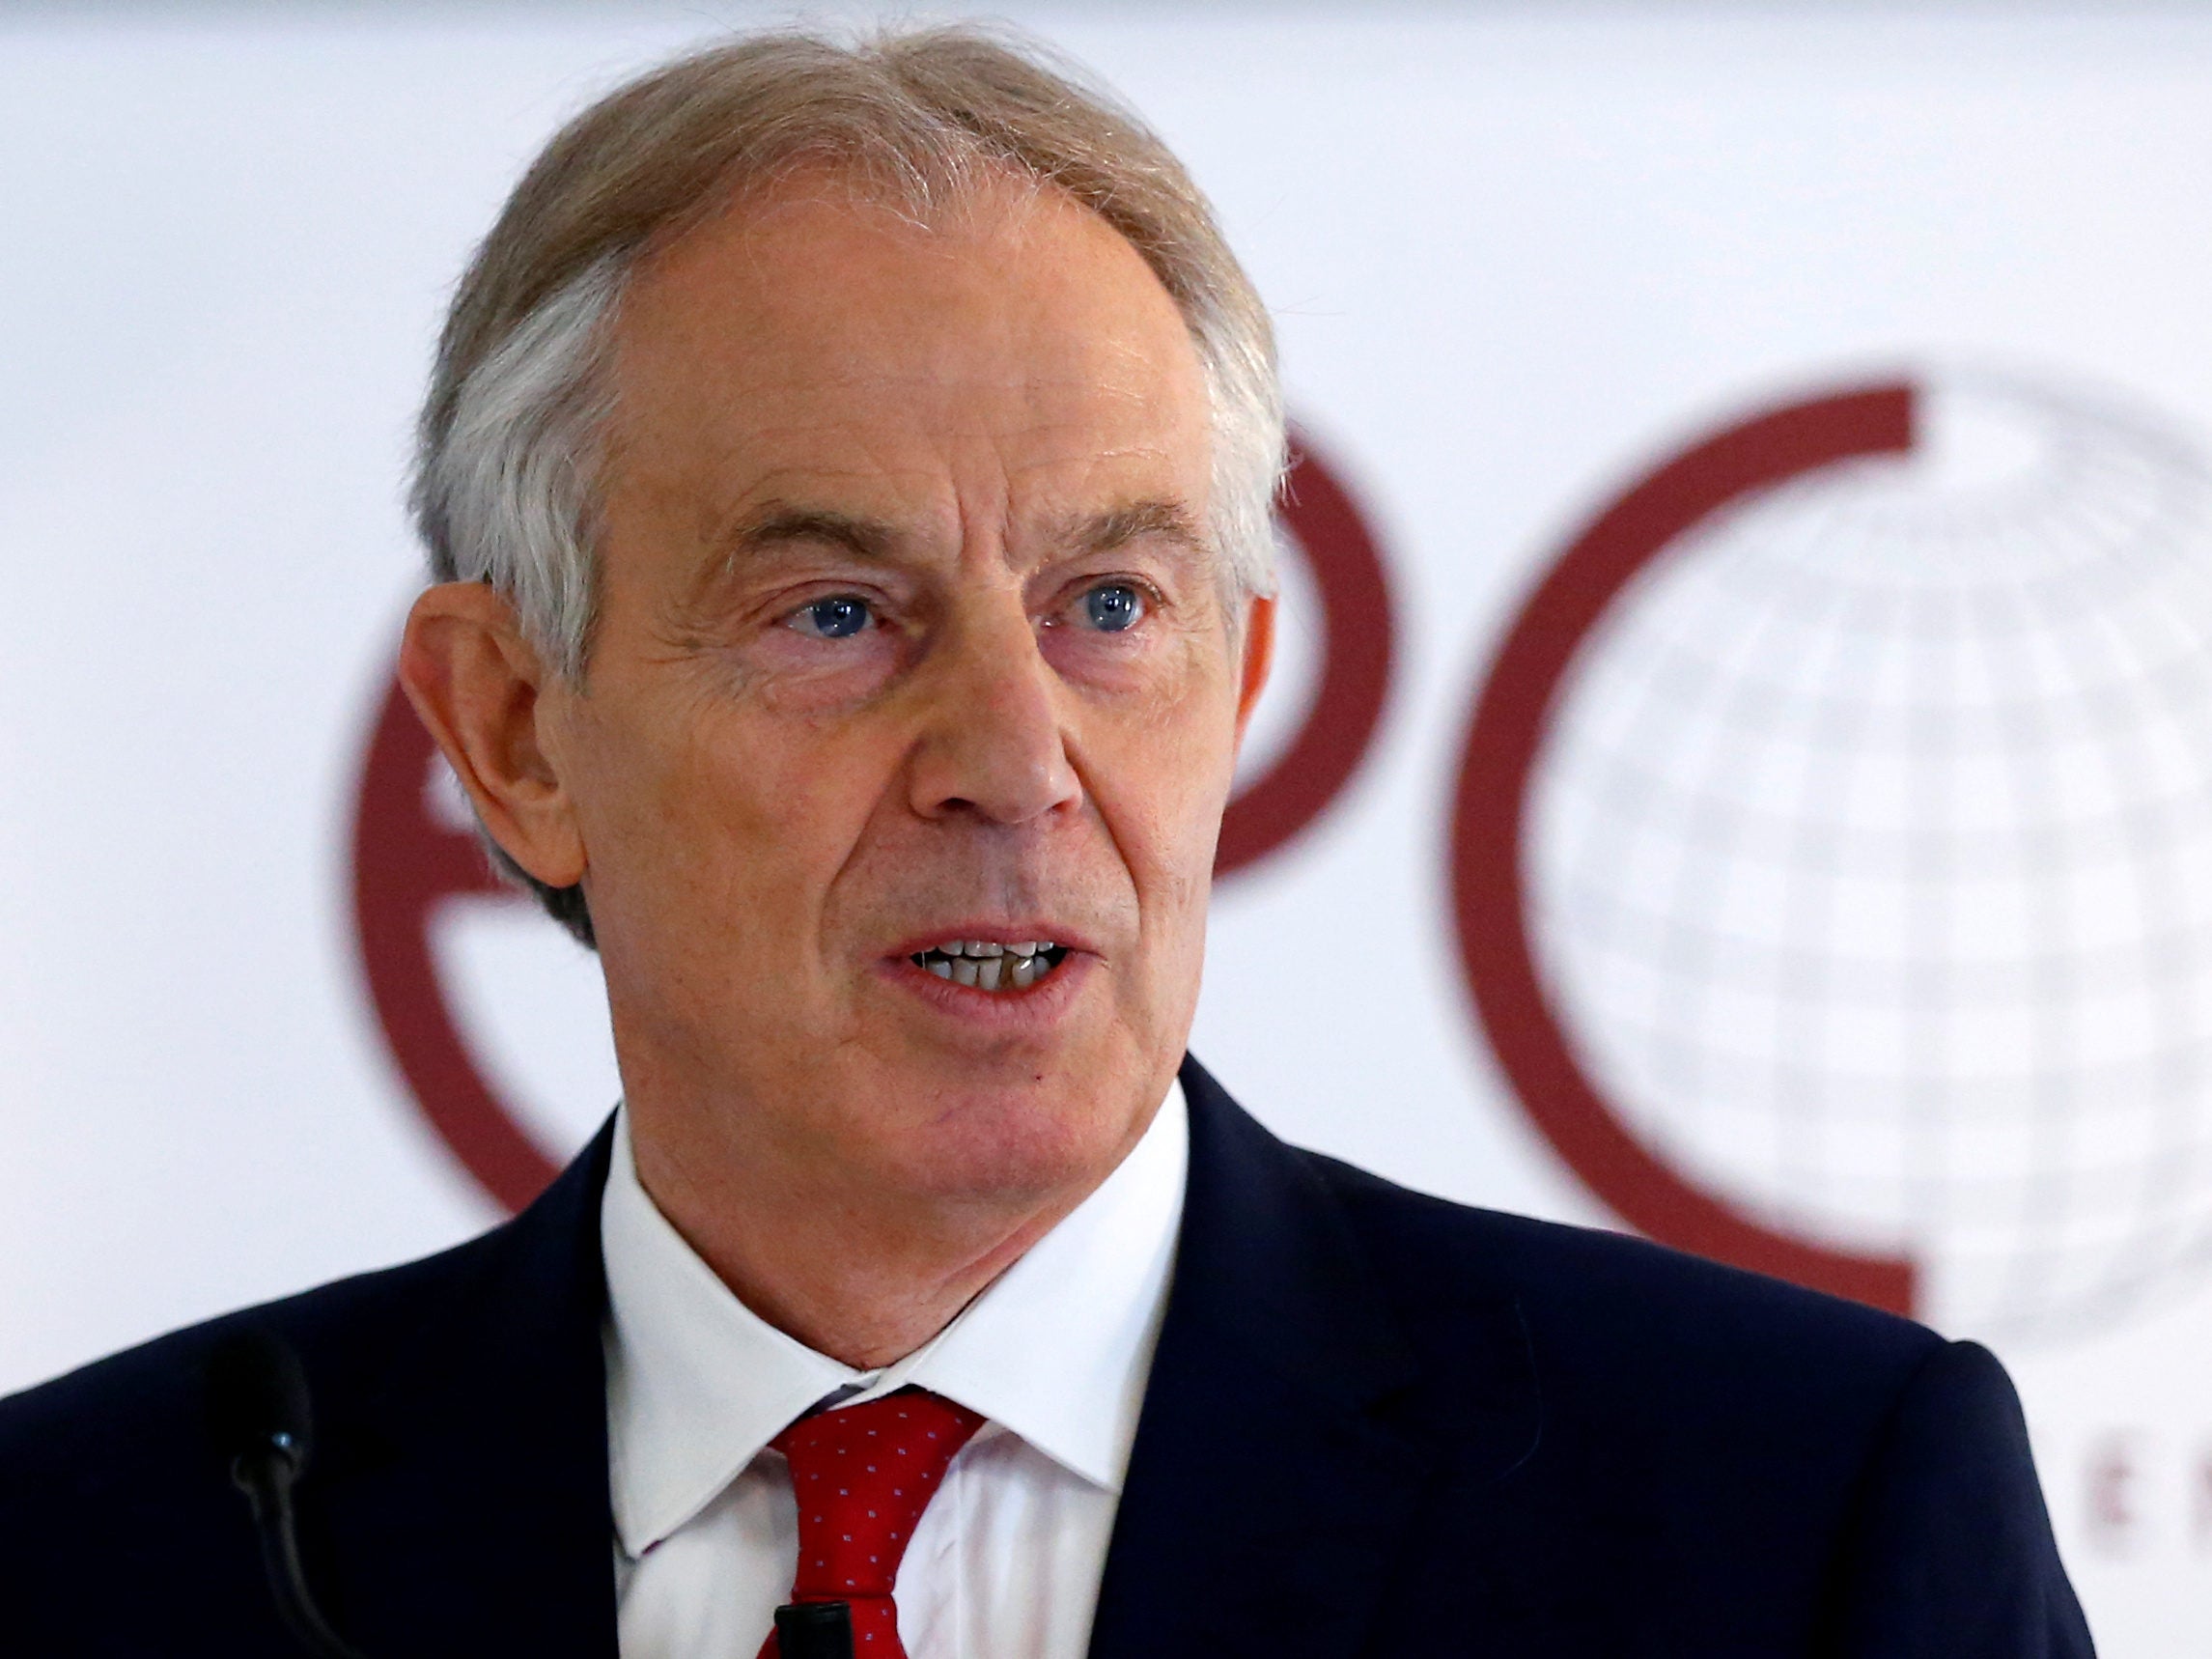 Tony Blair says 'uncomfortable' relationship with right-wing press was a 'necessary evil' during premiership